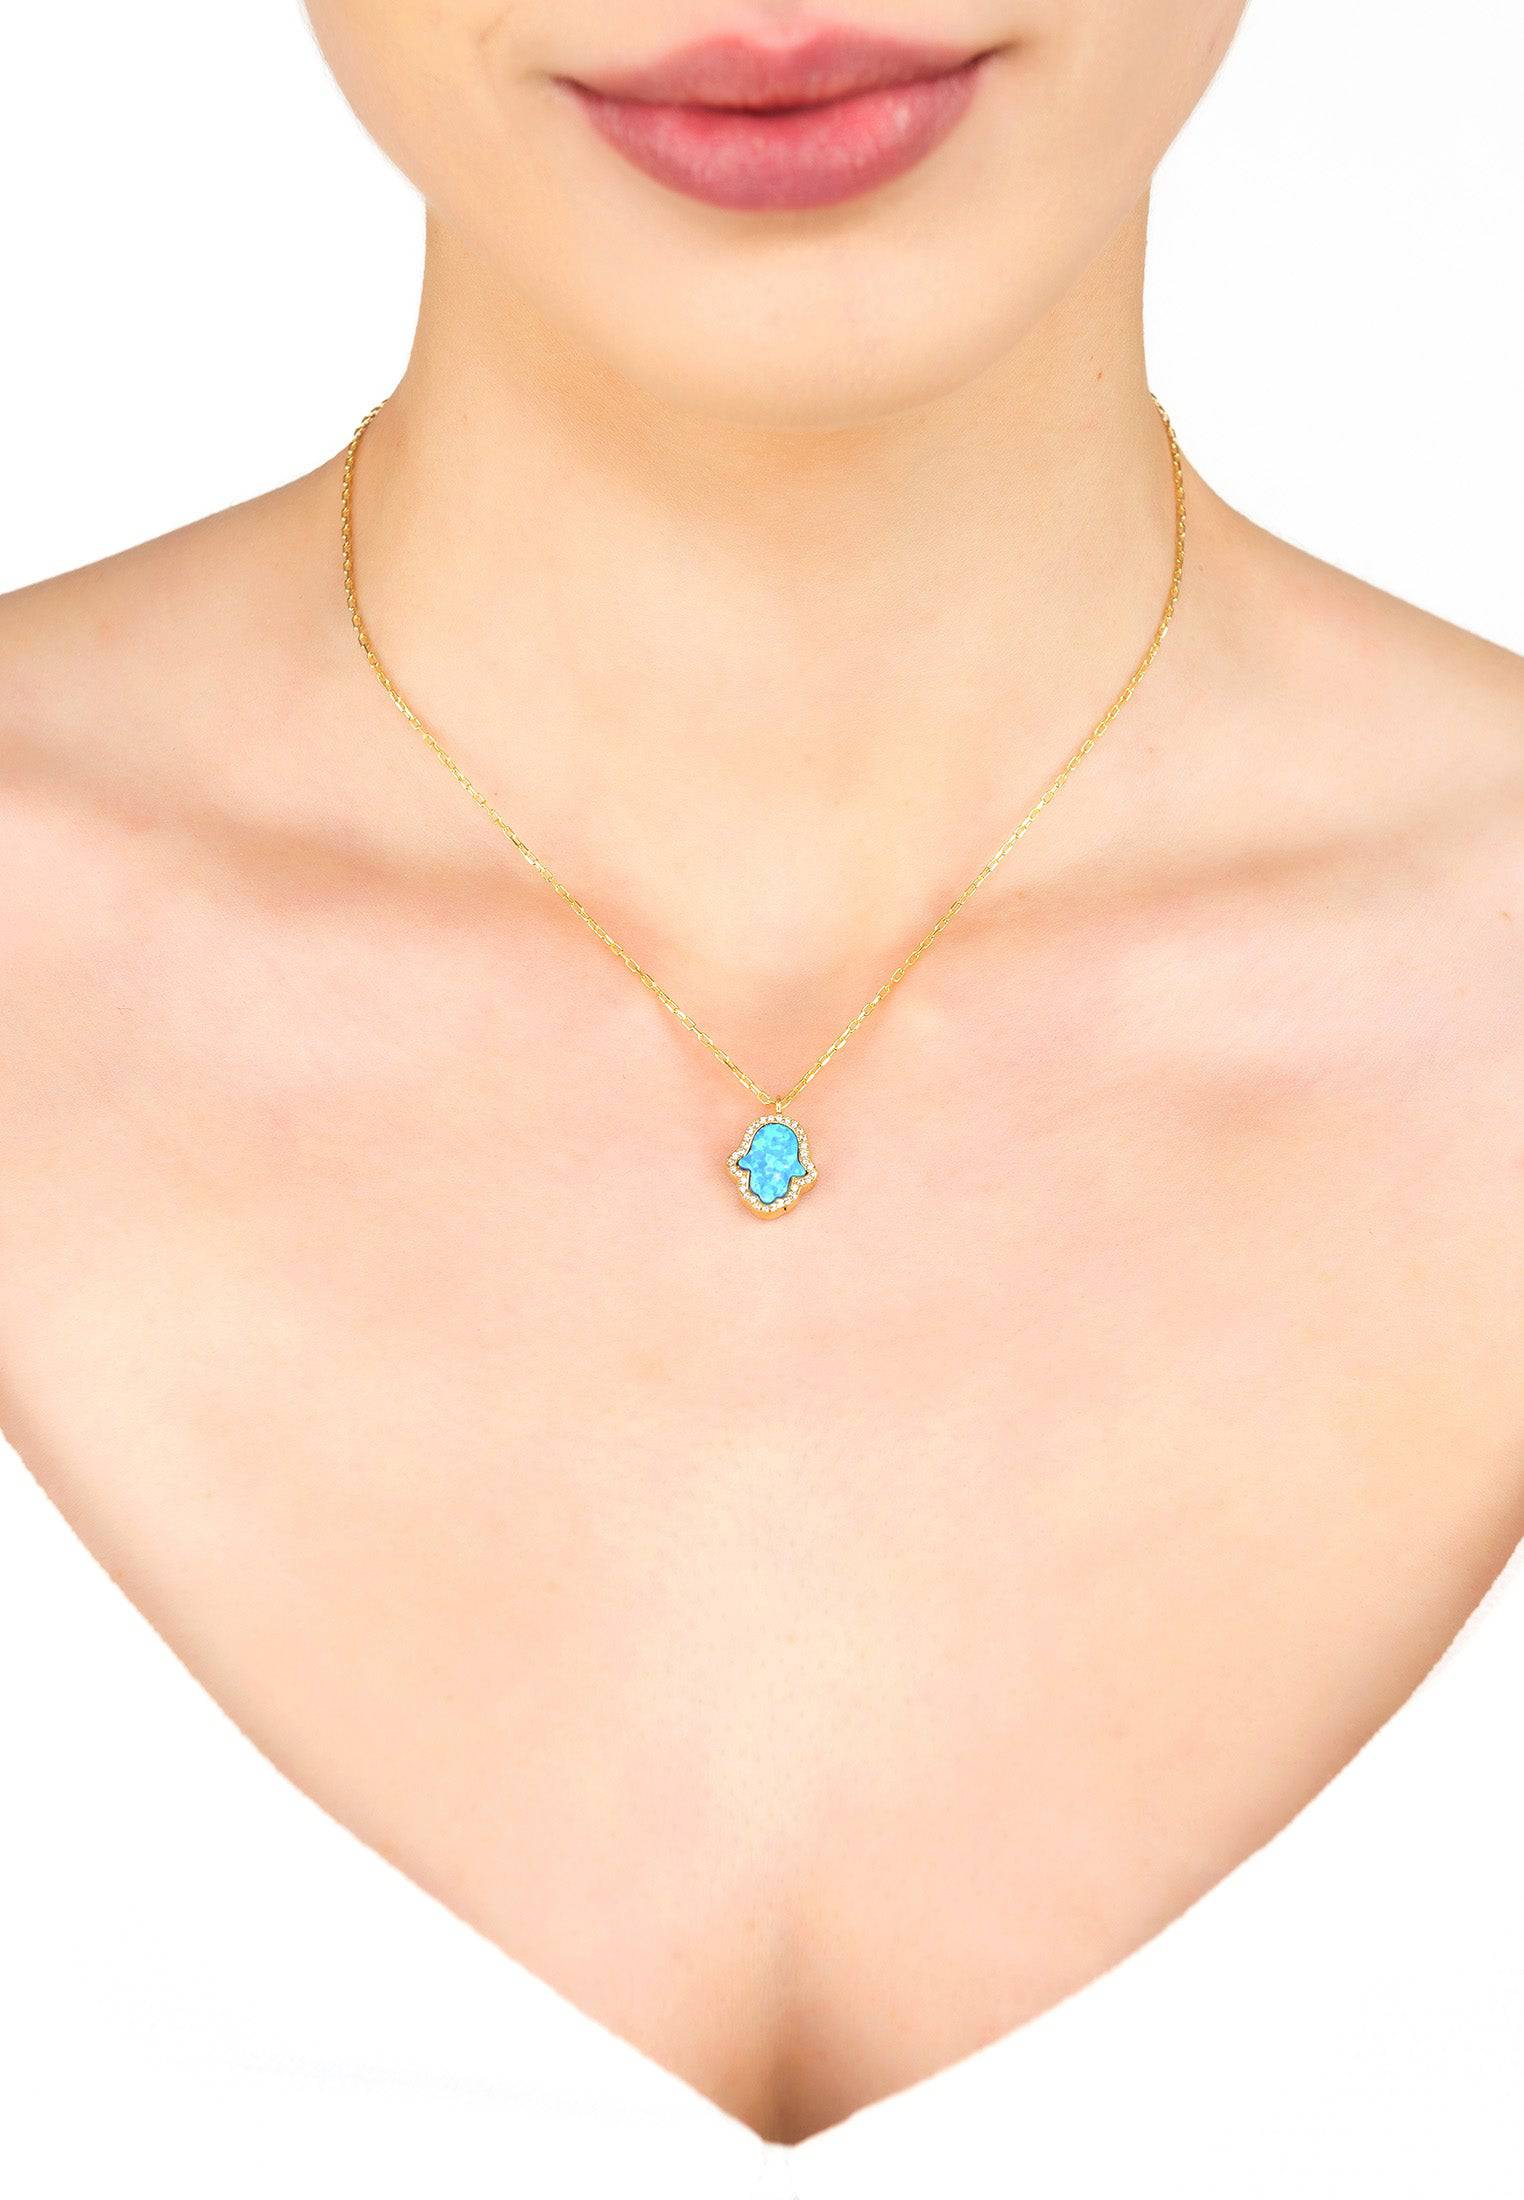 Hamsa Opalite Turquoise Blue Necklace Gold